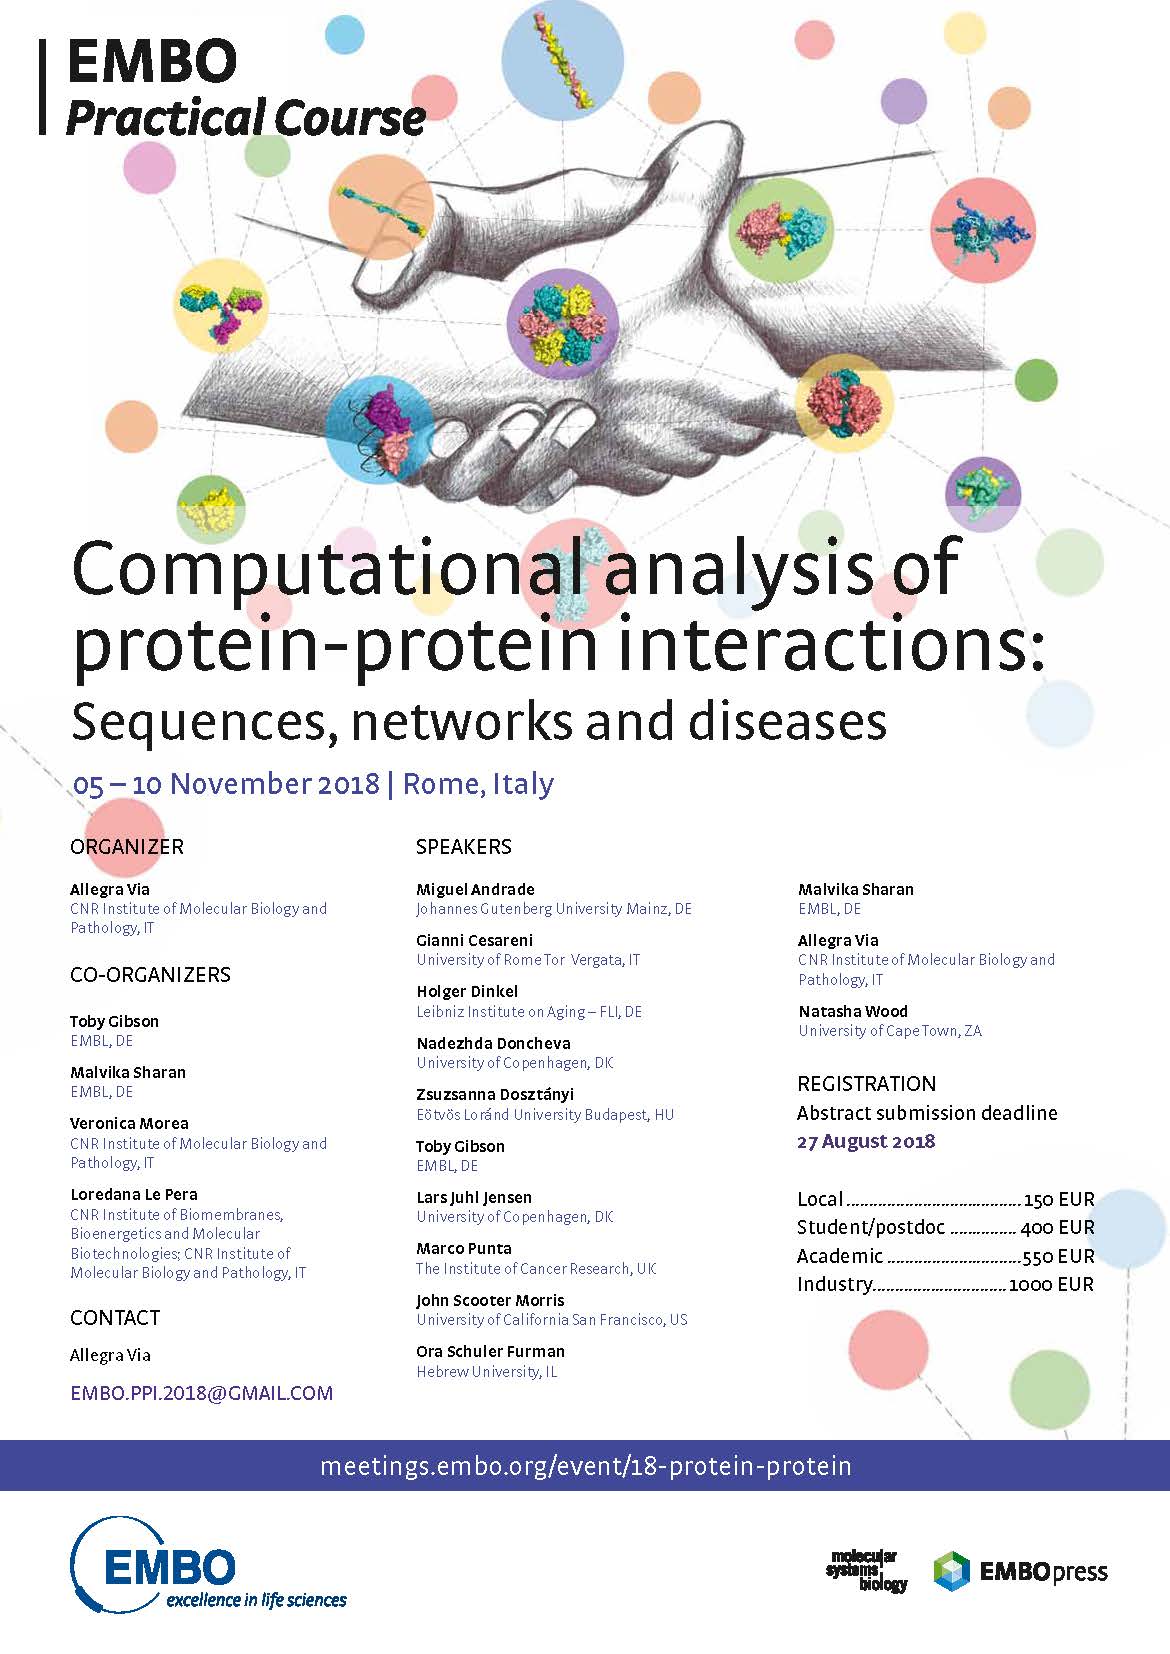 Computational analysis of protein-protein interactions: Sequences, networks and diseases